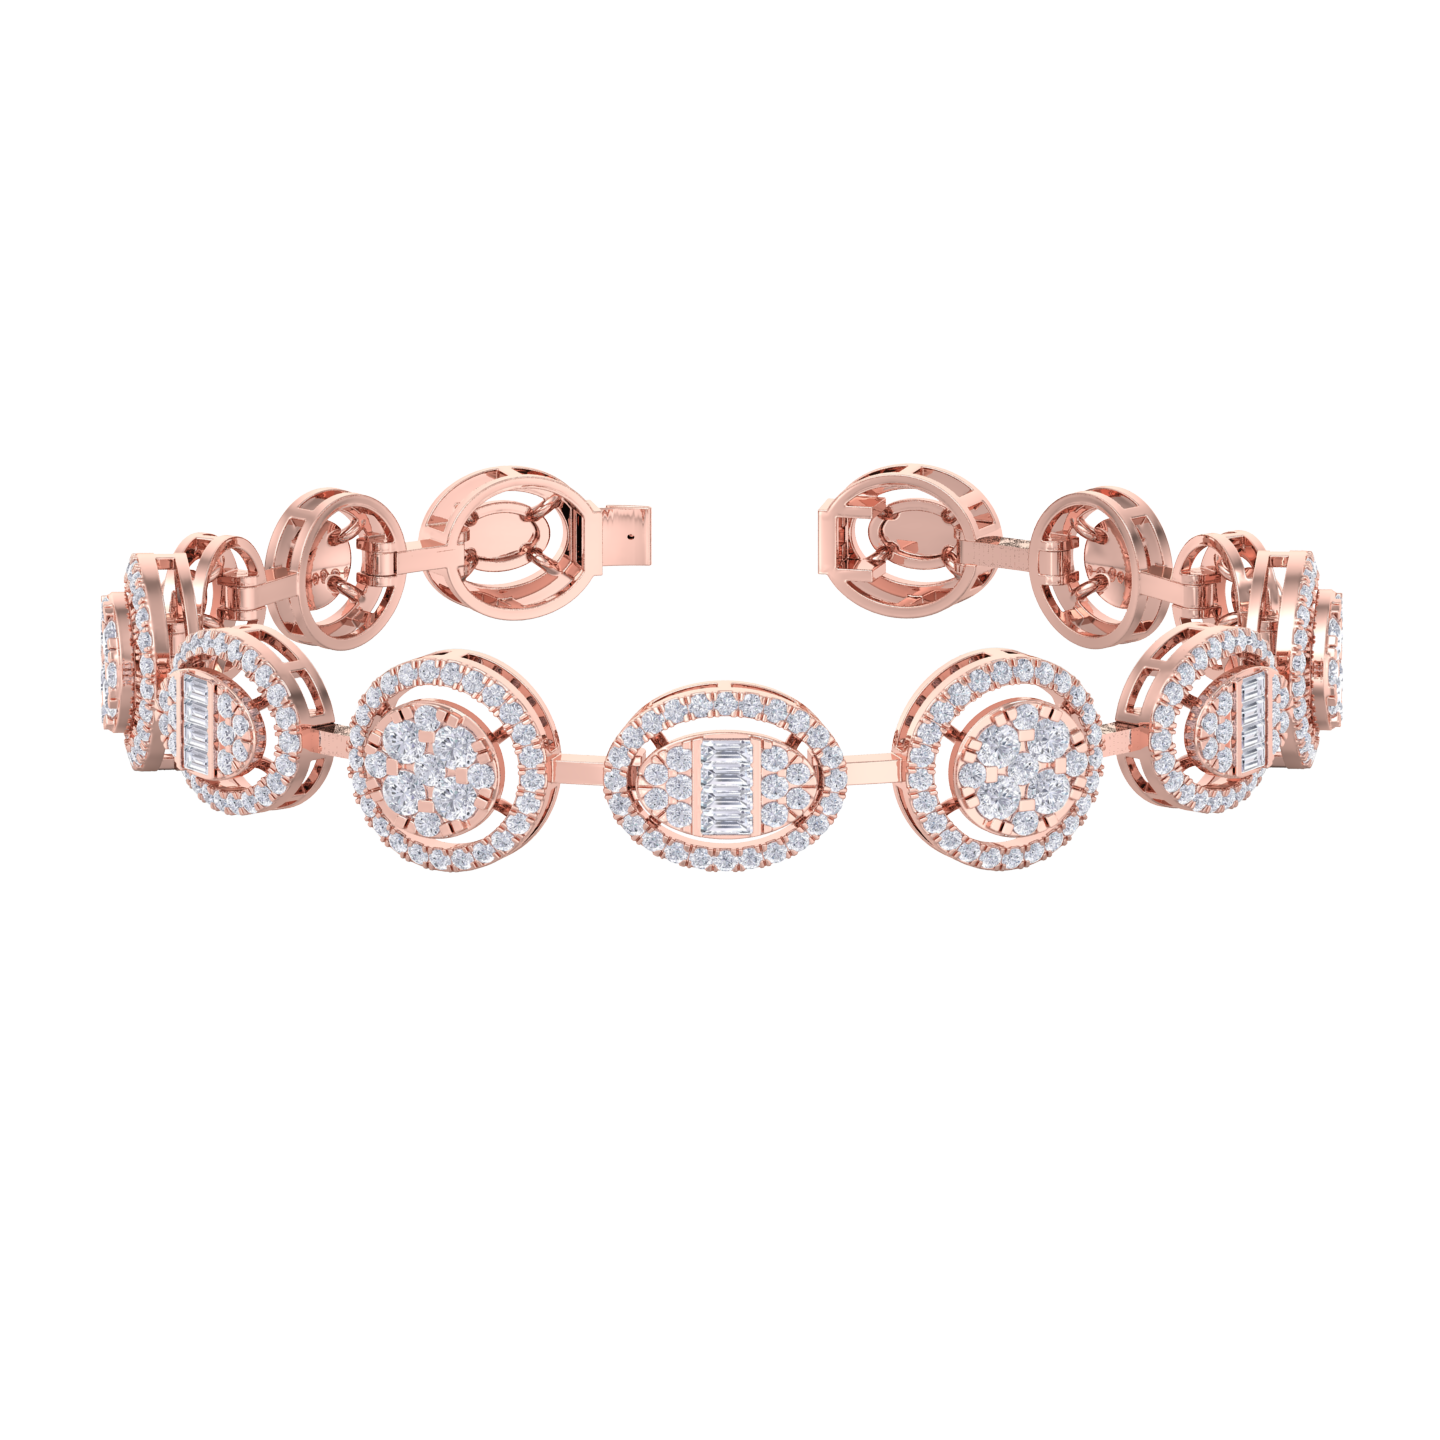 Statement bracelet in rose gold with white diamonds of 2.94 ct in weight